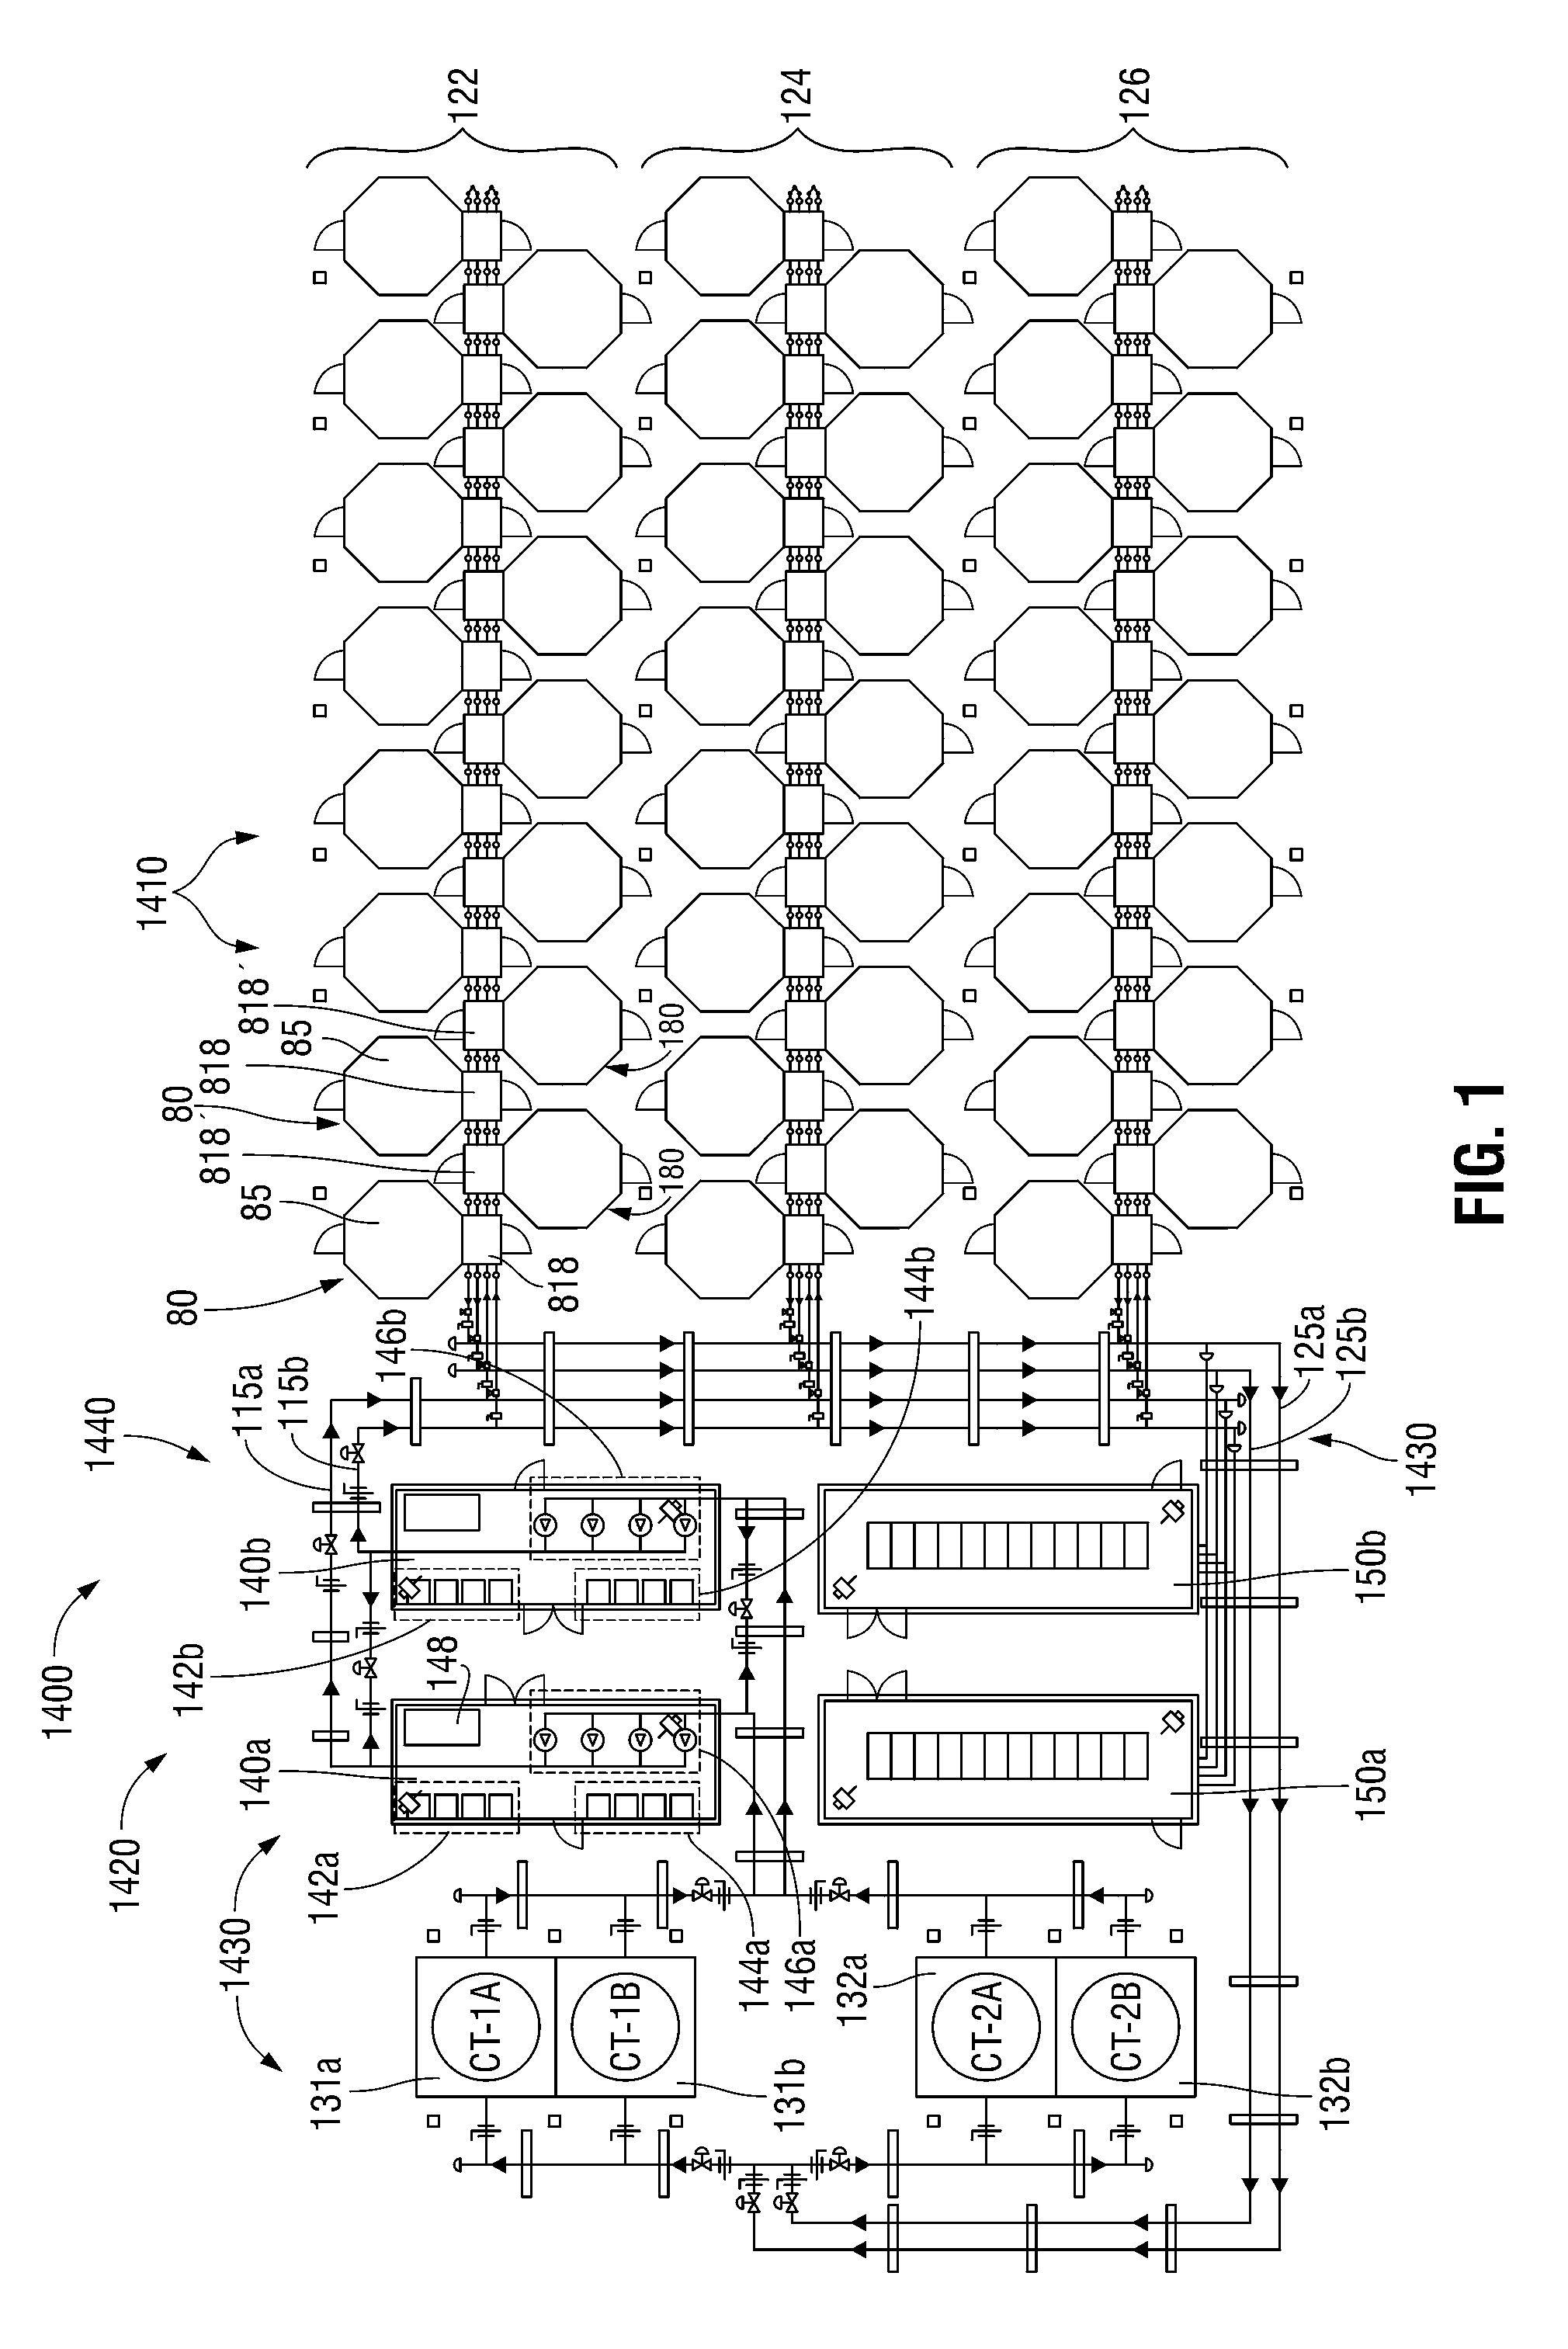 System and methods for cooling electronic equipment